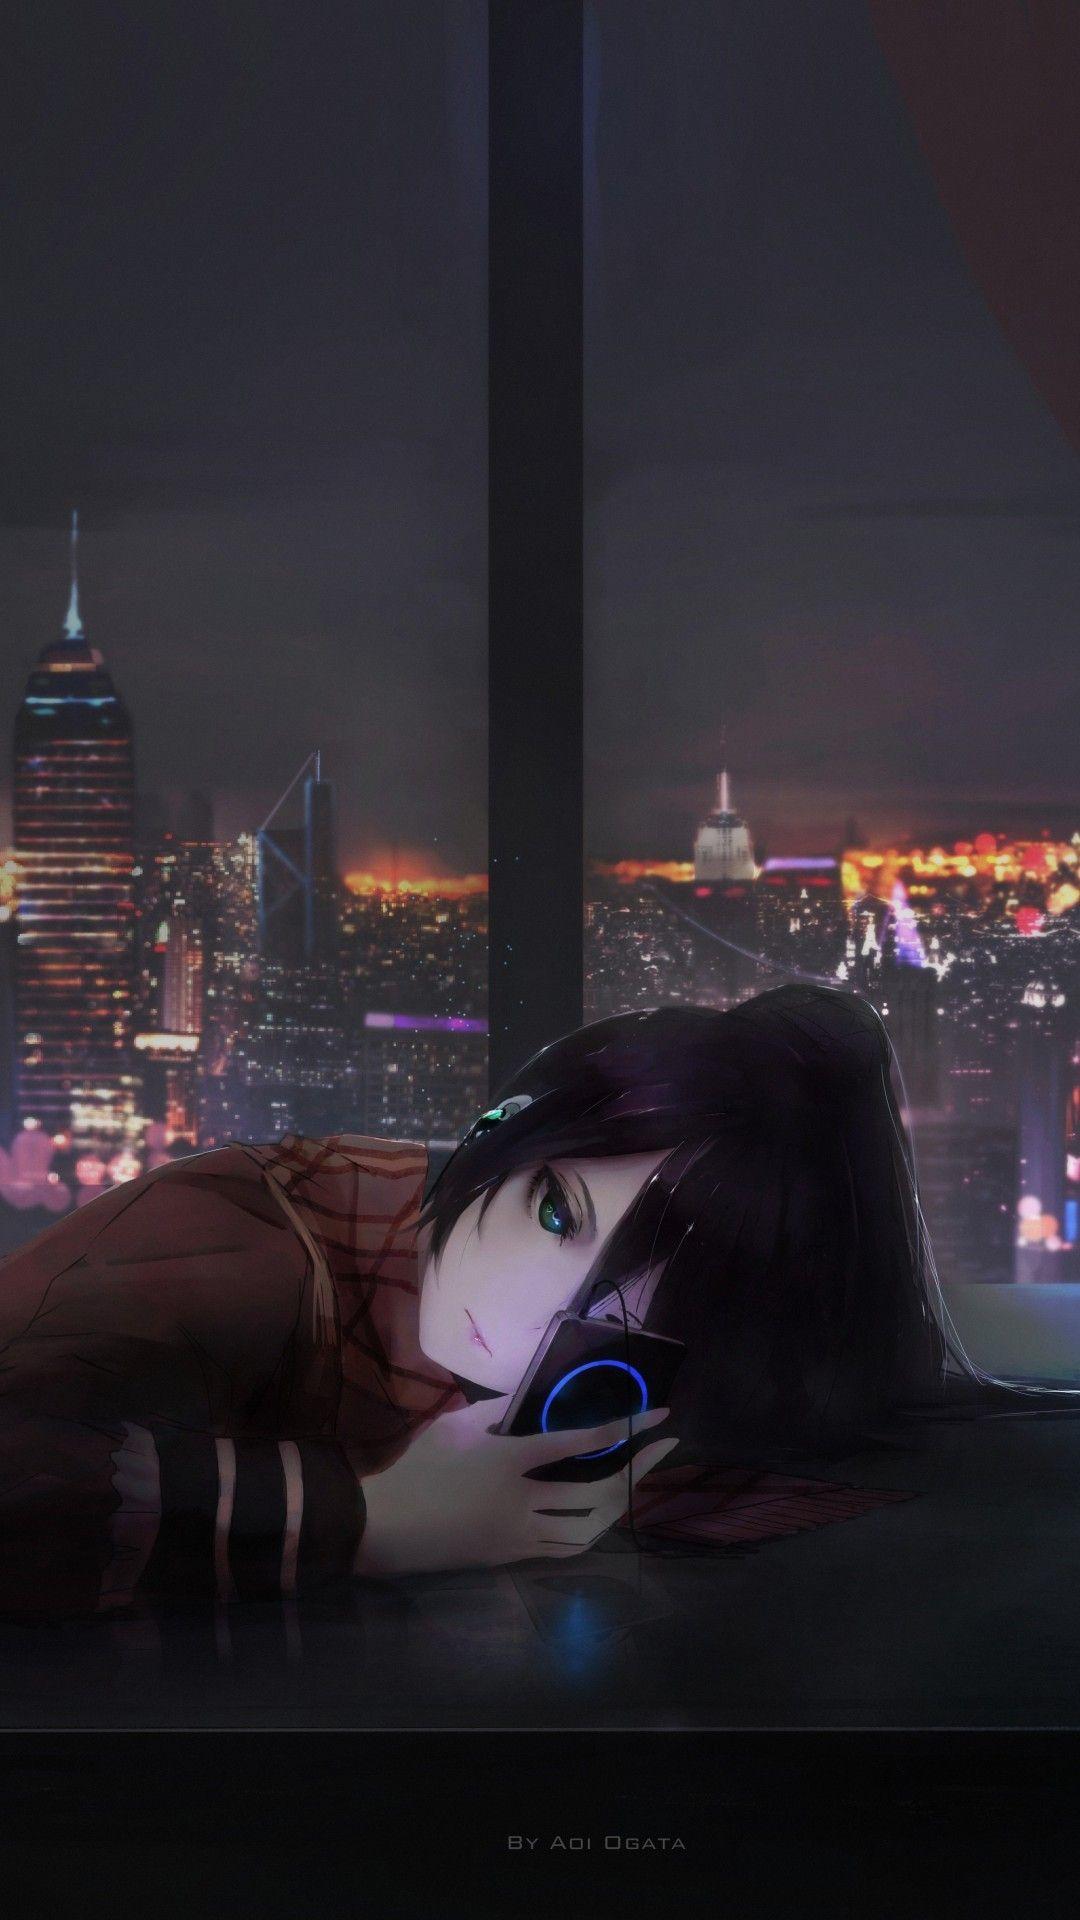 Depressed Anime Wallpapers  Top 30 Best Depressed Anime Wallpapers Download